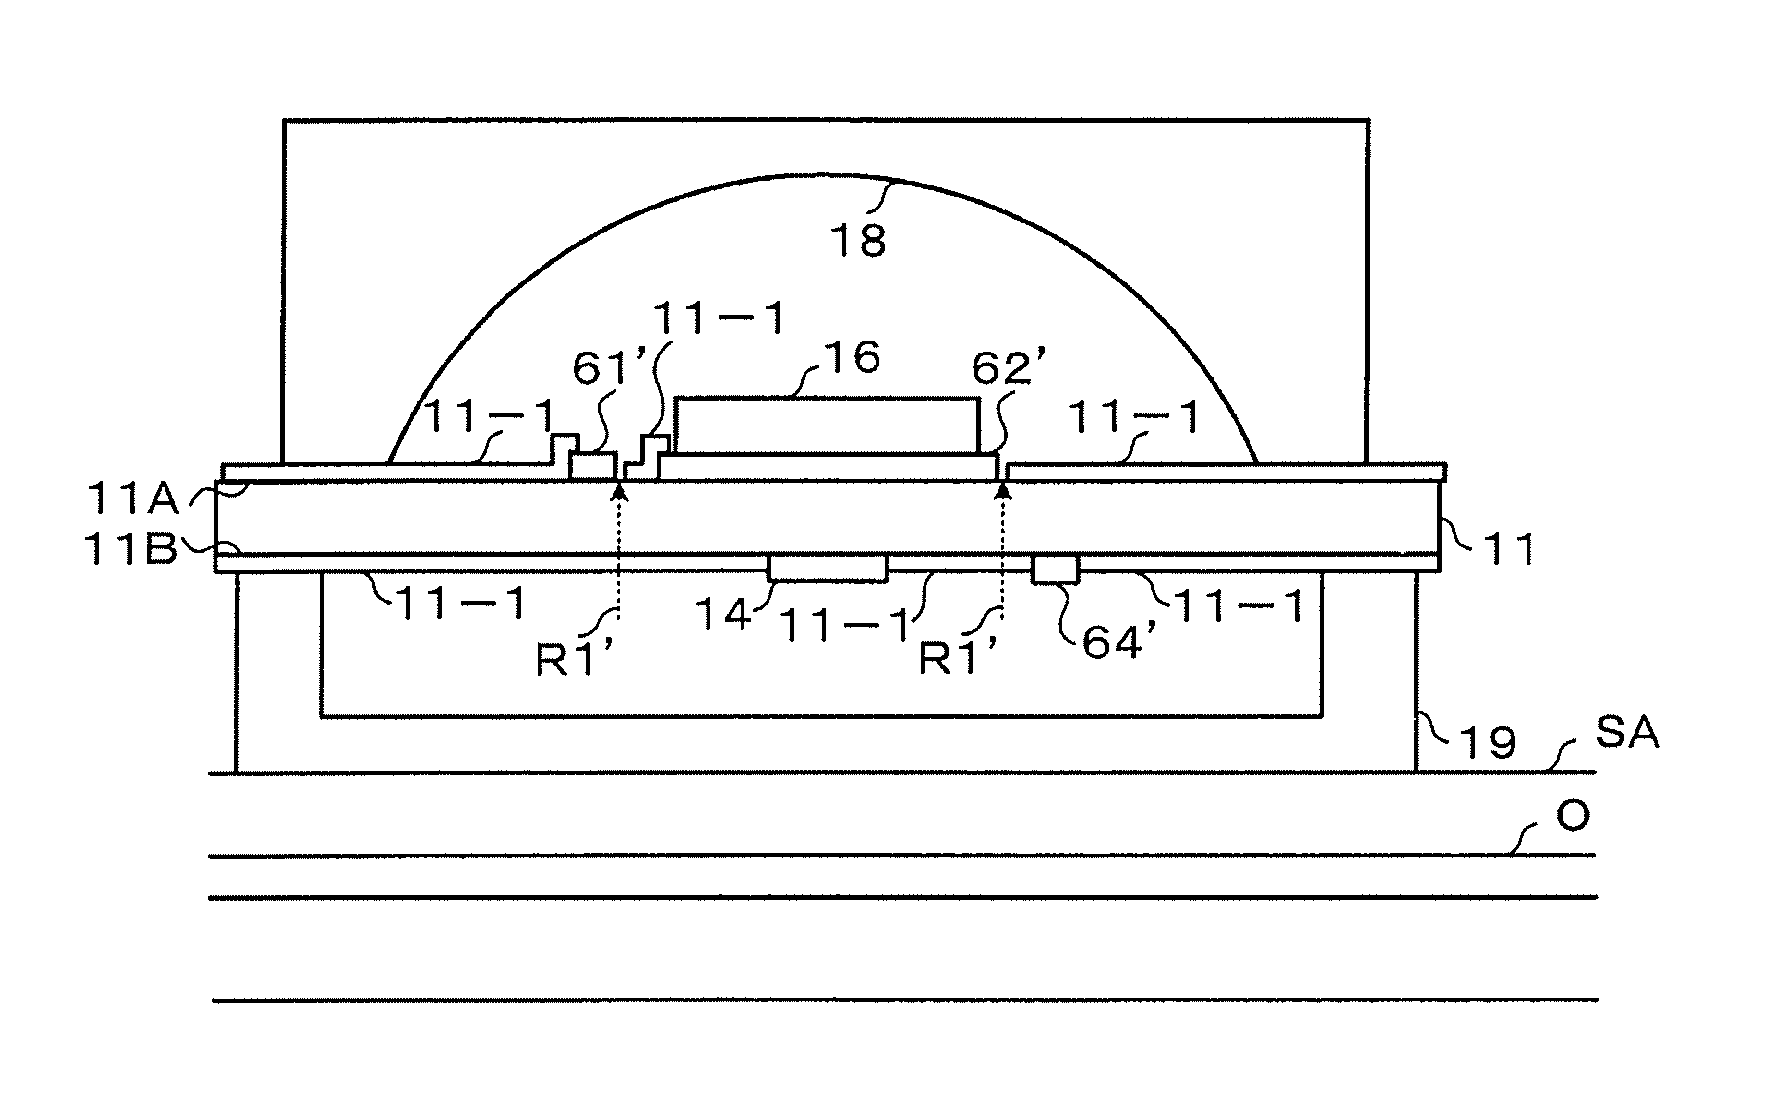 Giological information detector and biological information measuring device